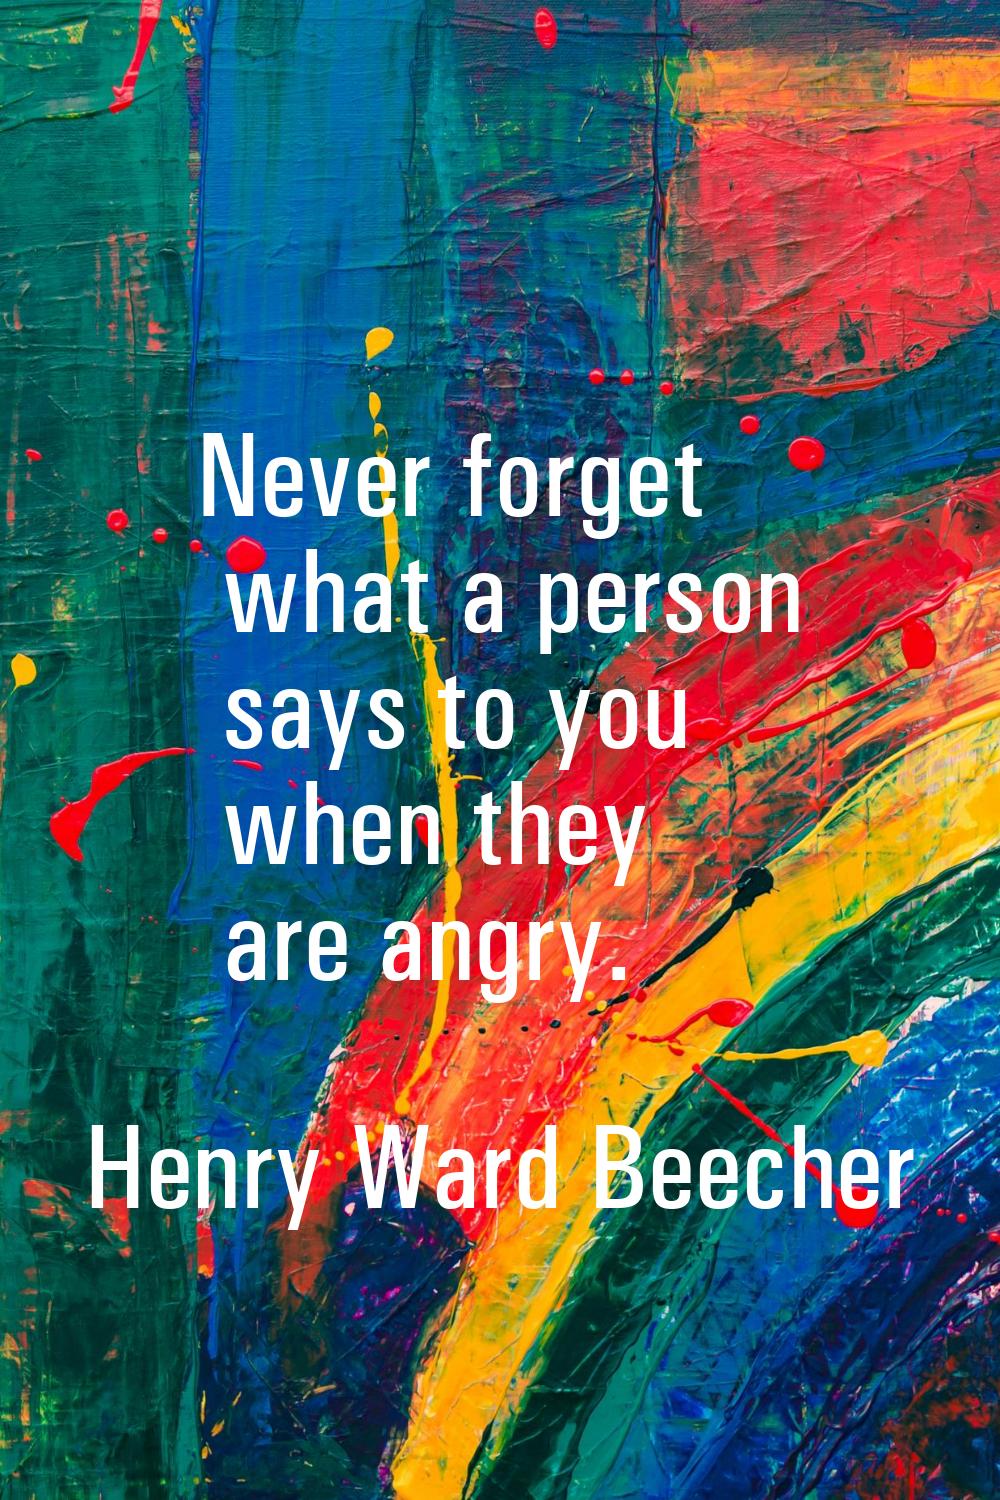 Never forget what a person says to you when they are angry.